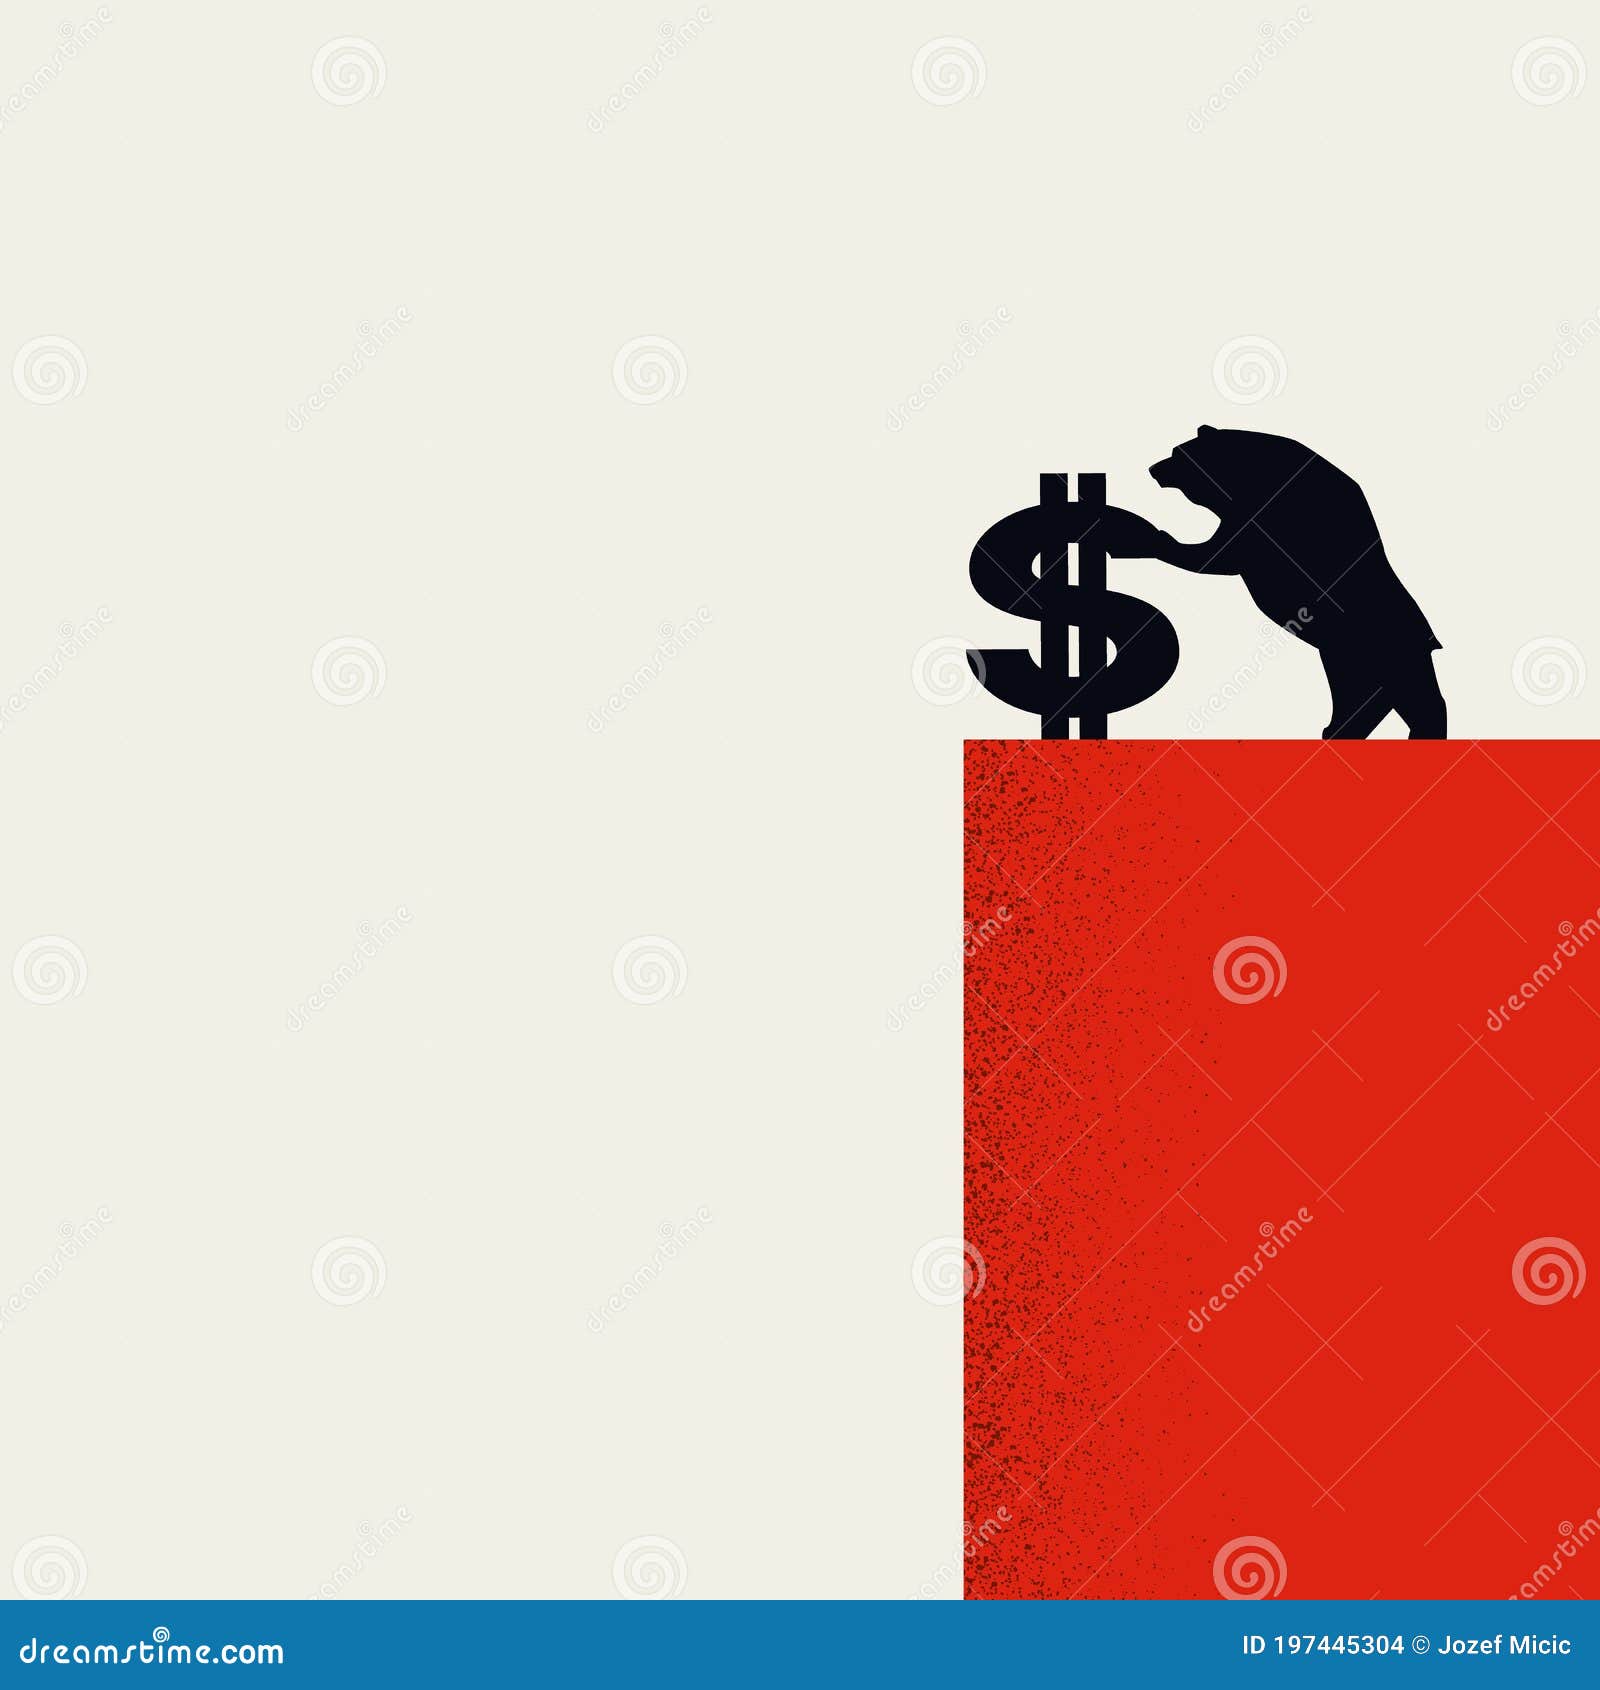 bearish trend on financial market with bear pushing dollar off a cliff. stock market, recession, selling strategy 